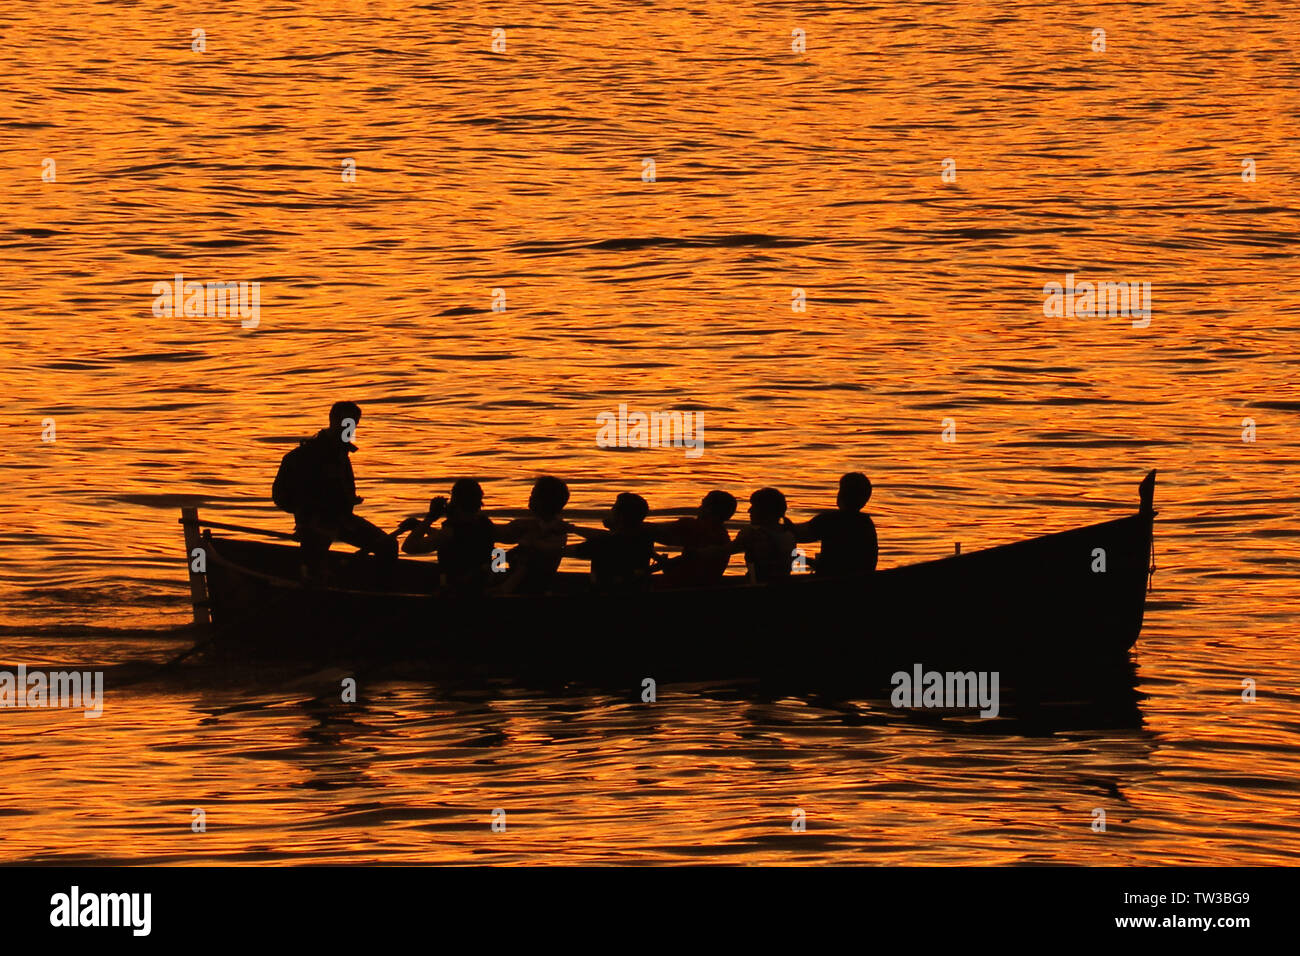 Successful team work on a rowboat in the summertime Stock Photo